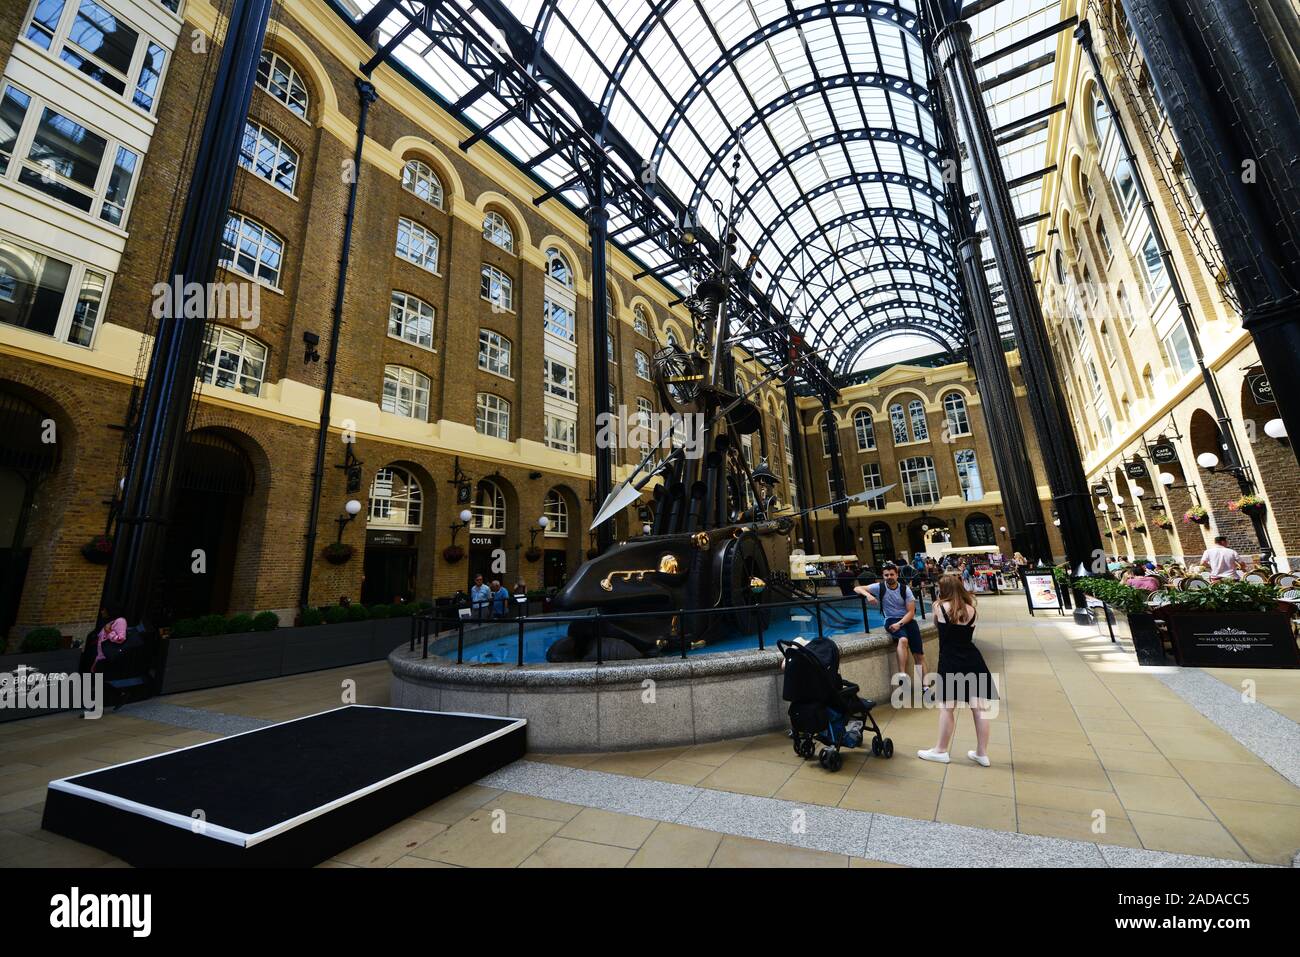 Hay's Galleria is an old warehouse converted to a modern shopping and office complex near the river Thames in London, England. Stock Photo